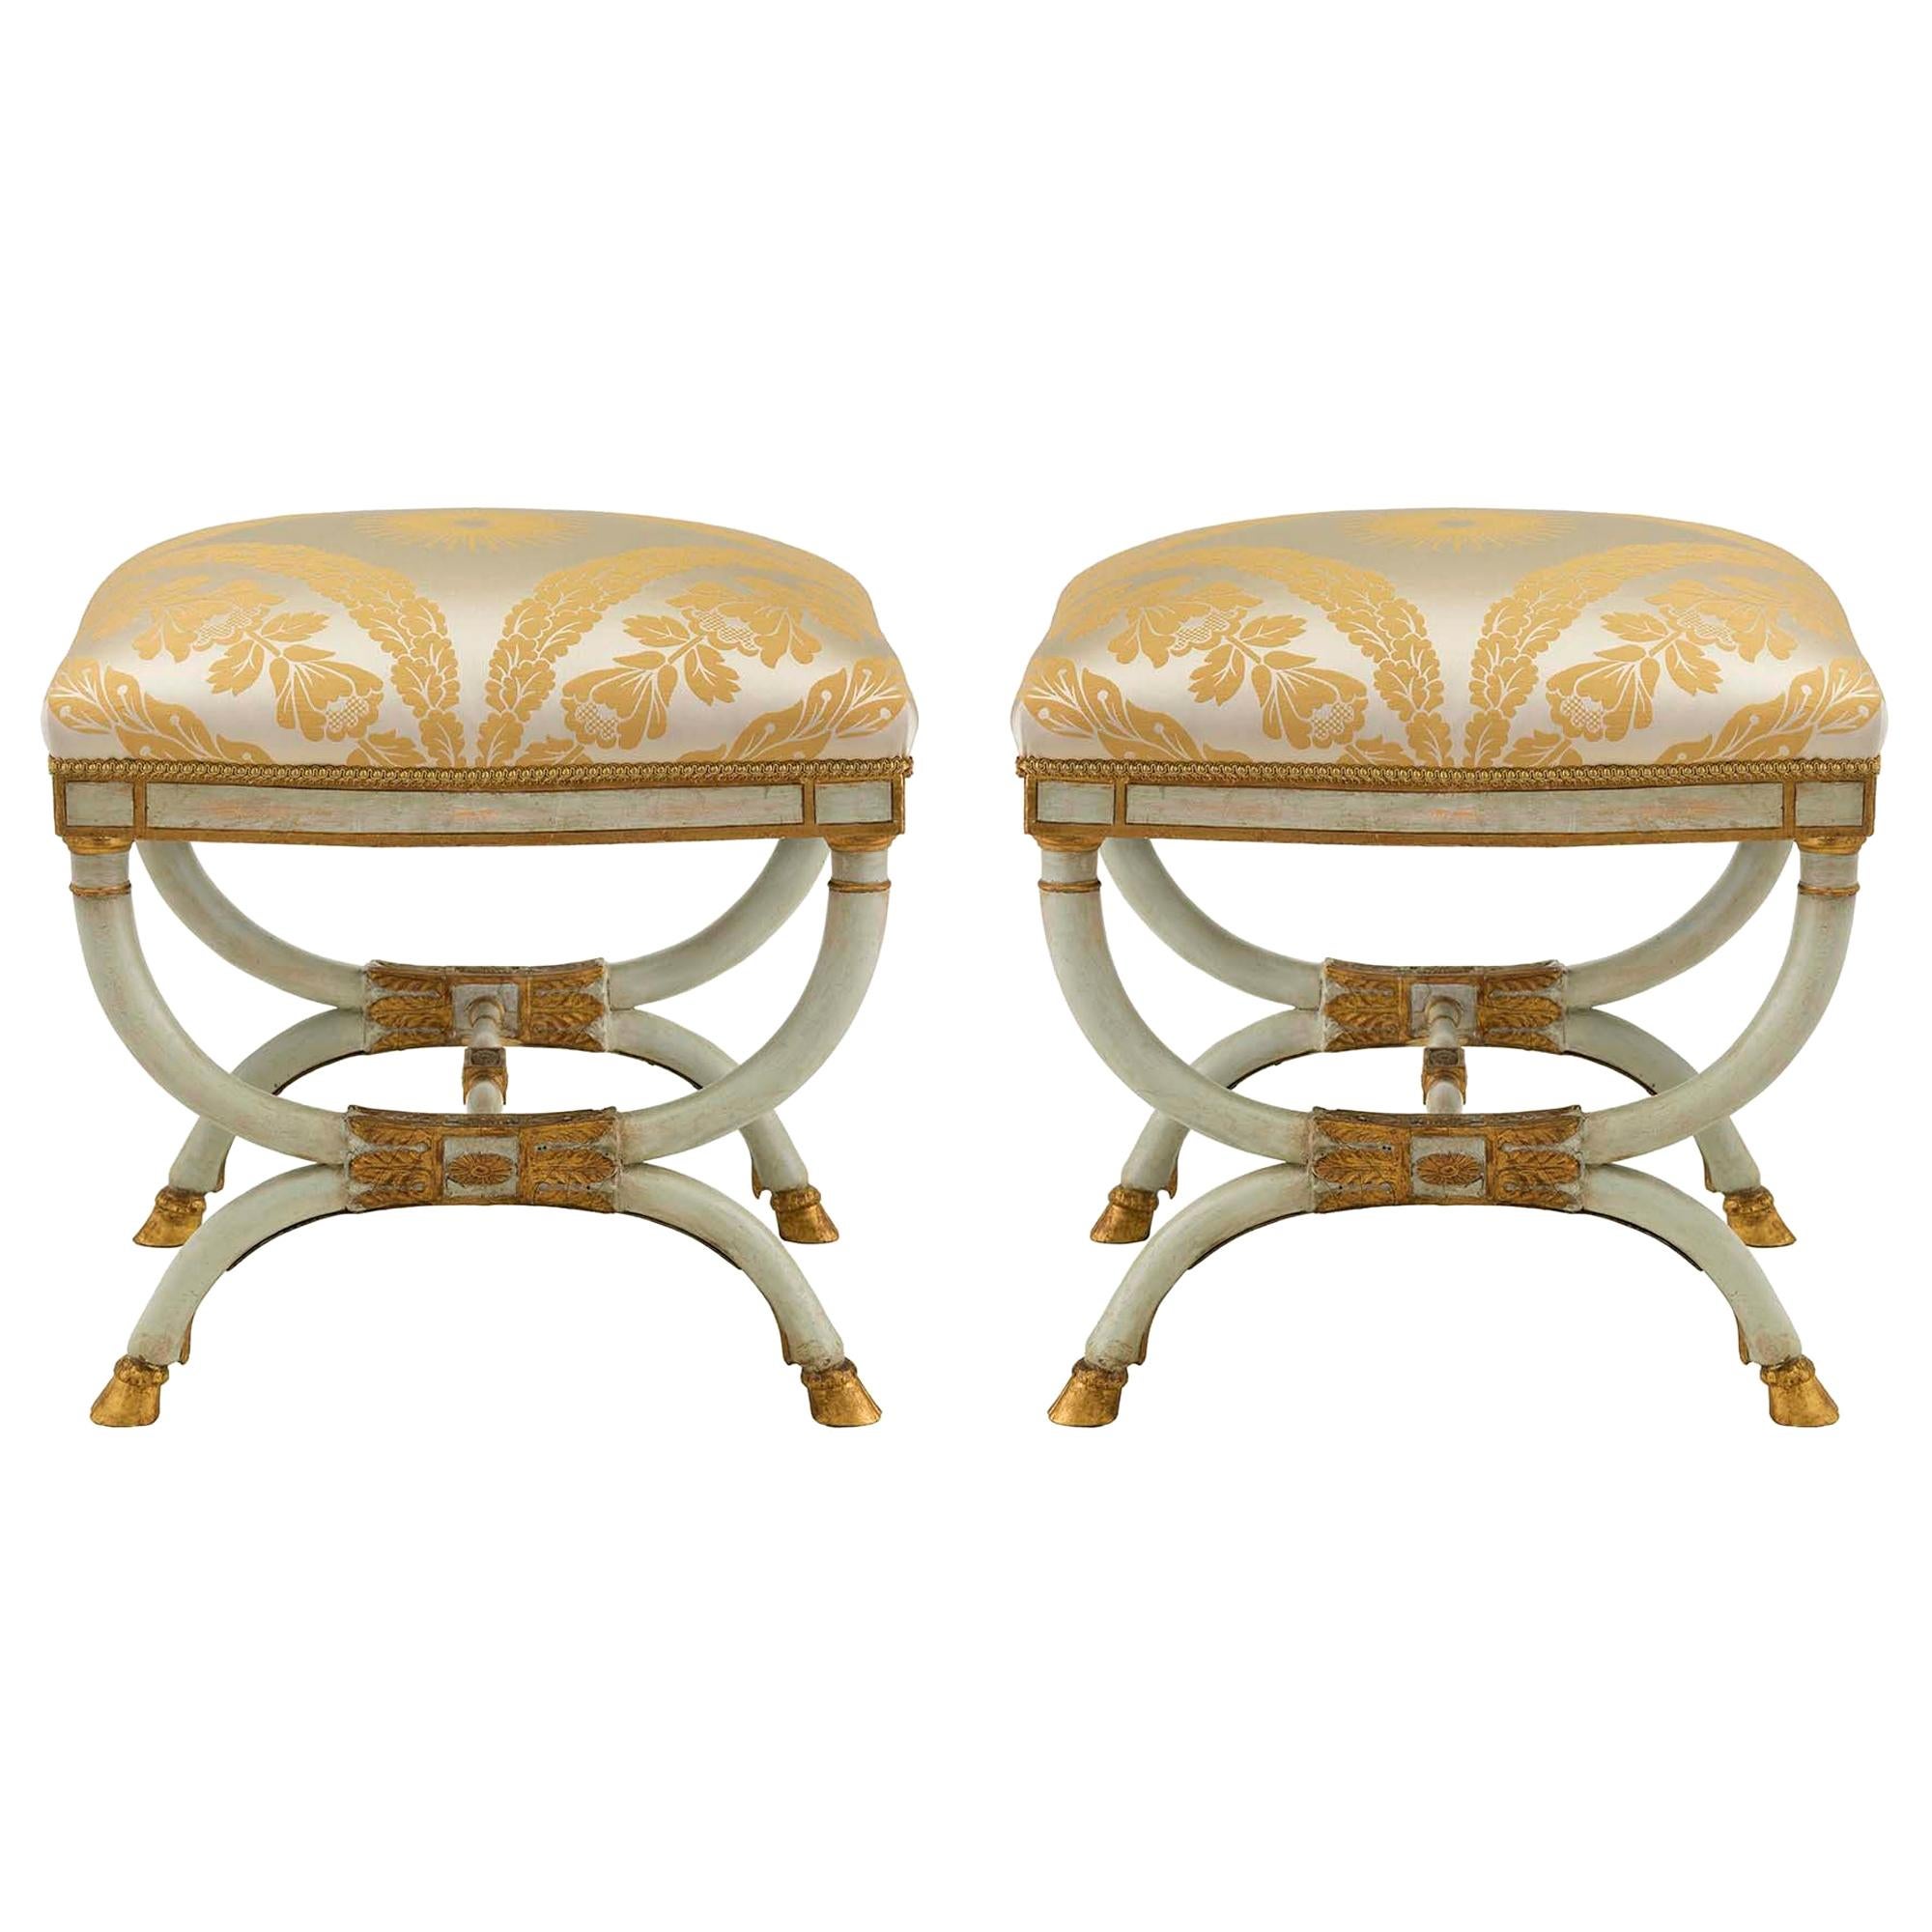 Pair of Italian Early 19th Century Neoclassical Style Patinated and Gilt Benches For Sale